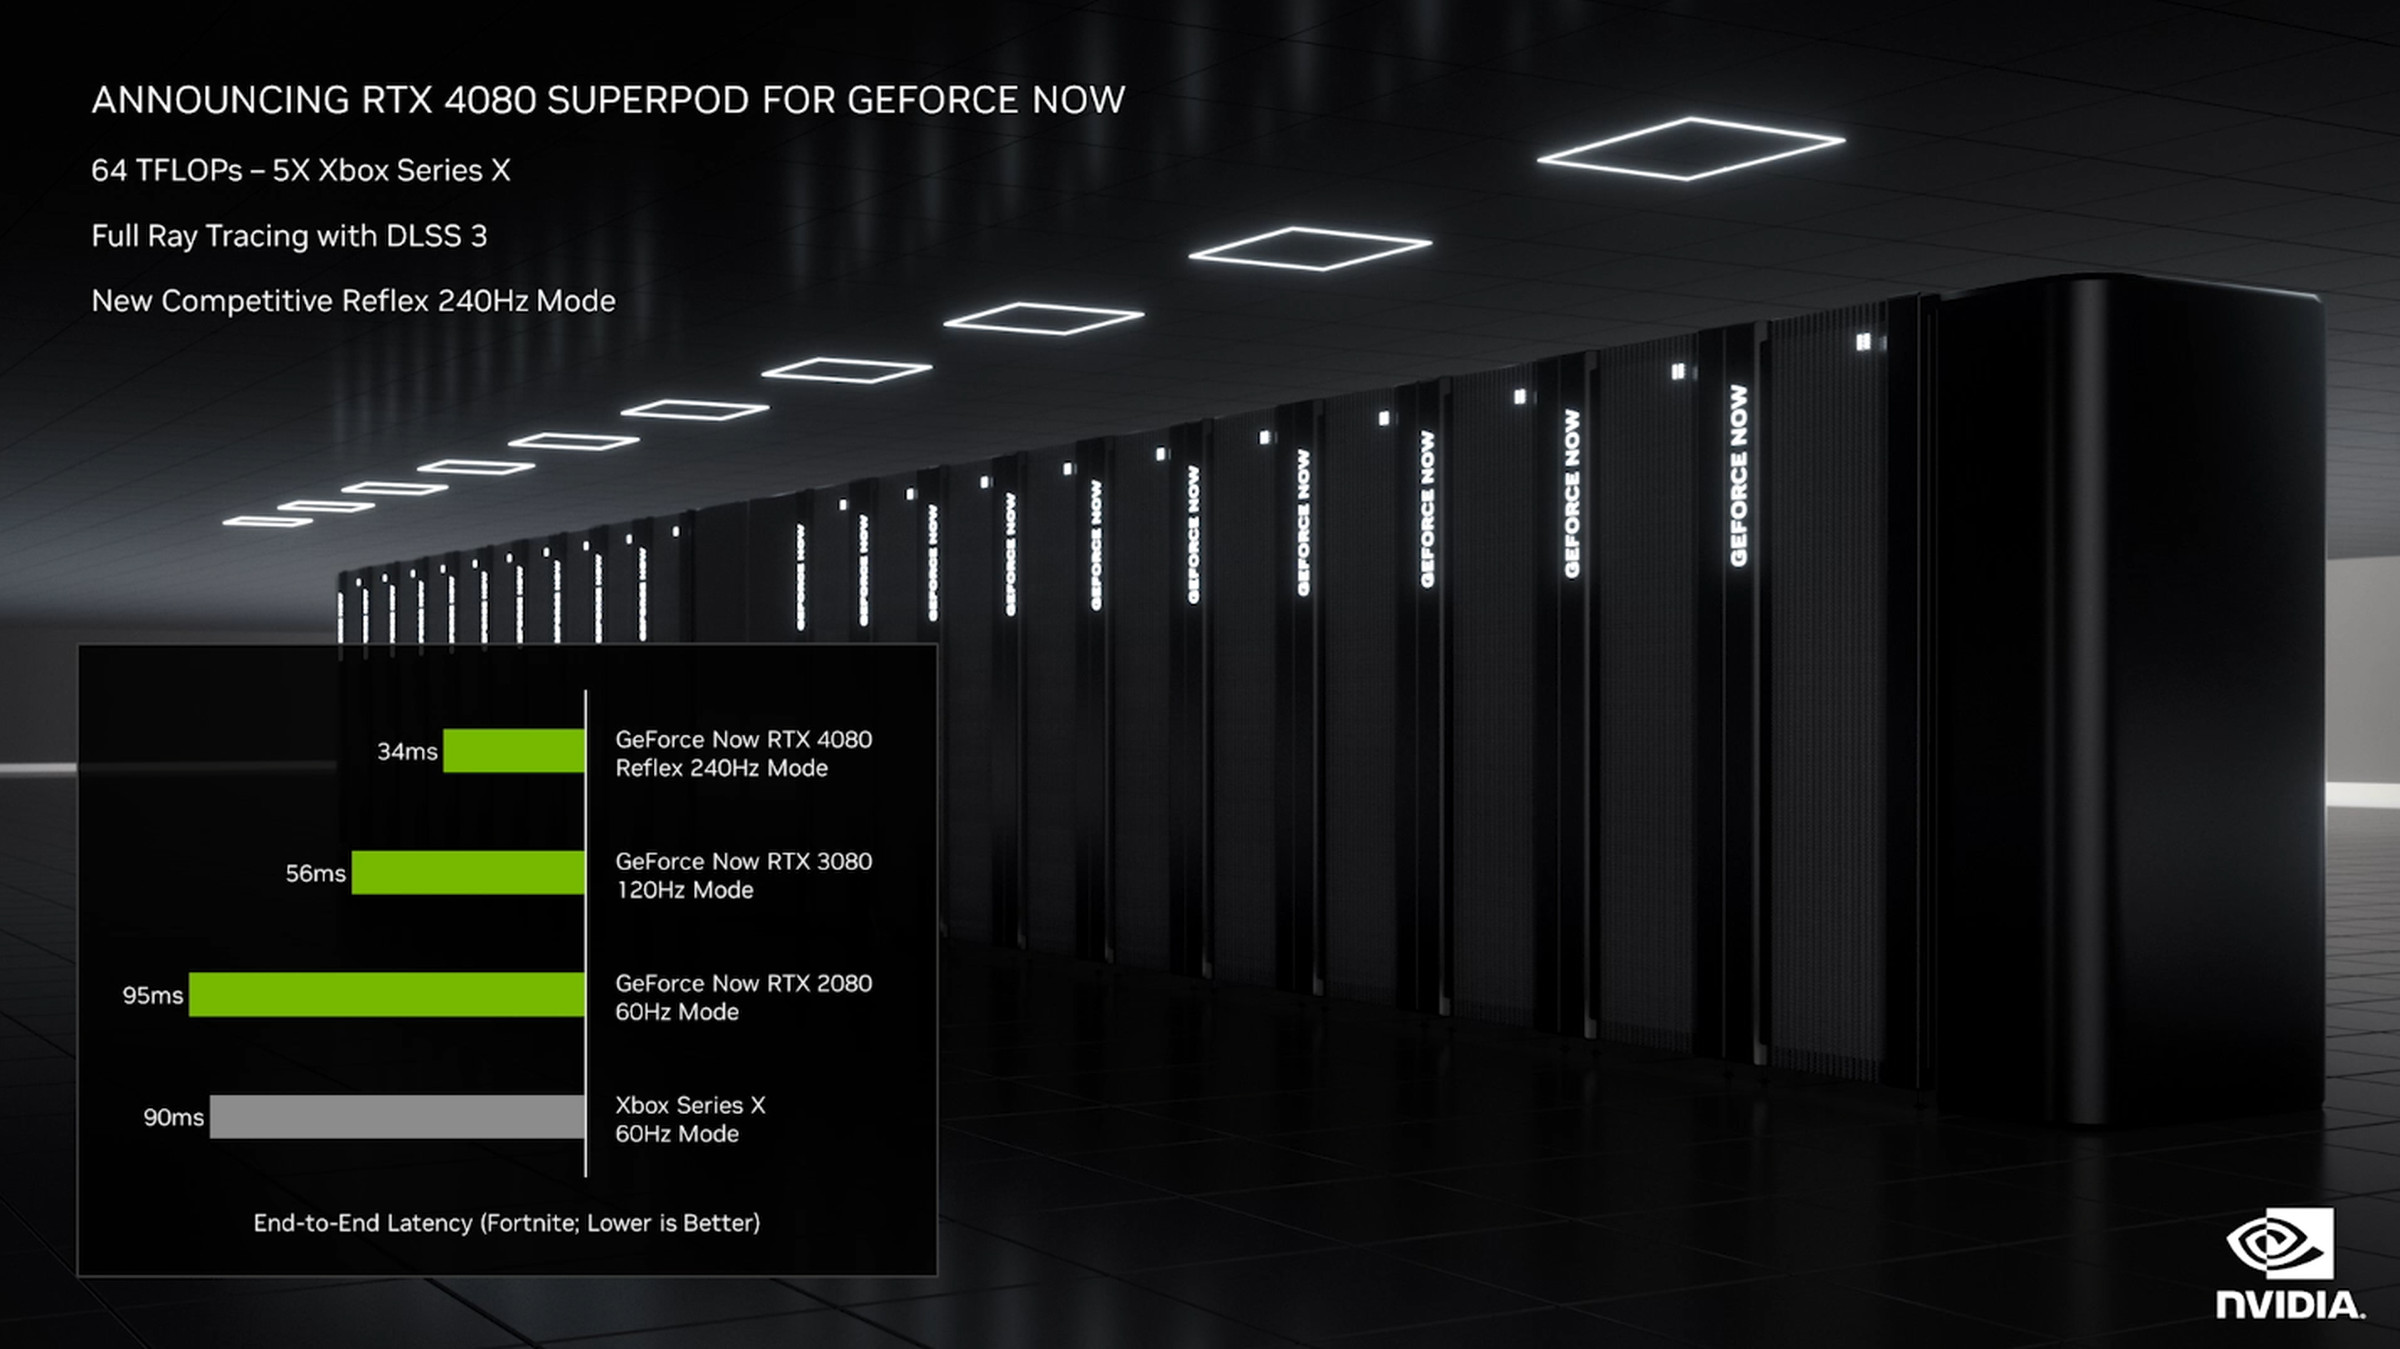 GeForce Now Ultimate will have very low latency.